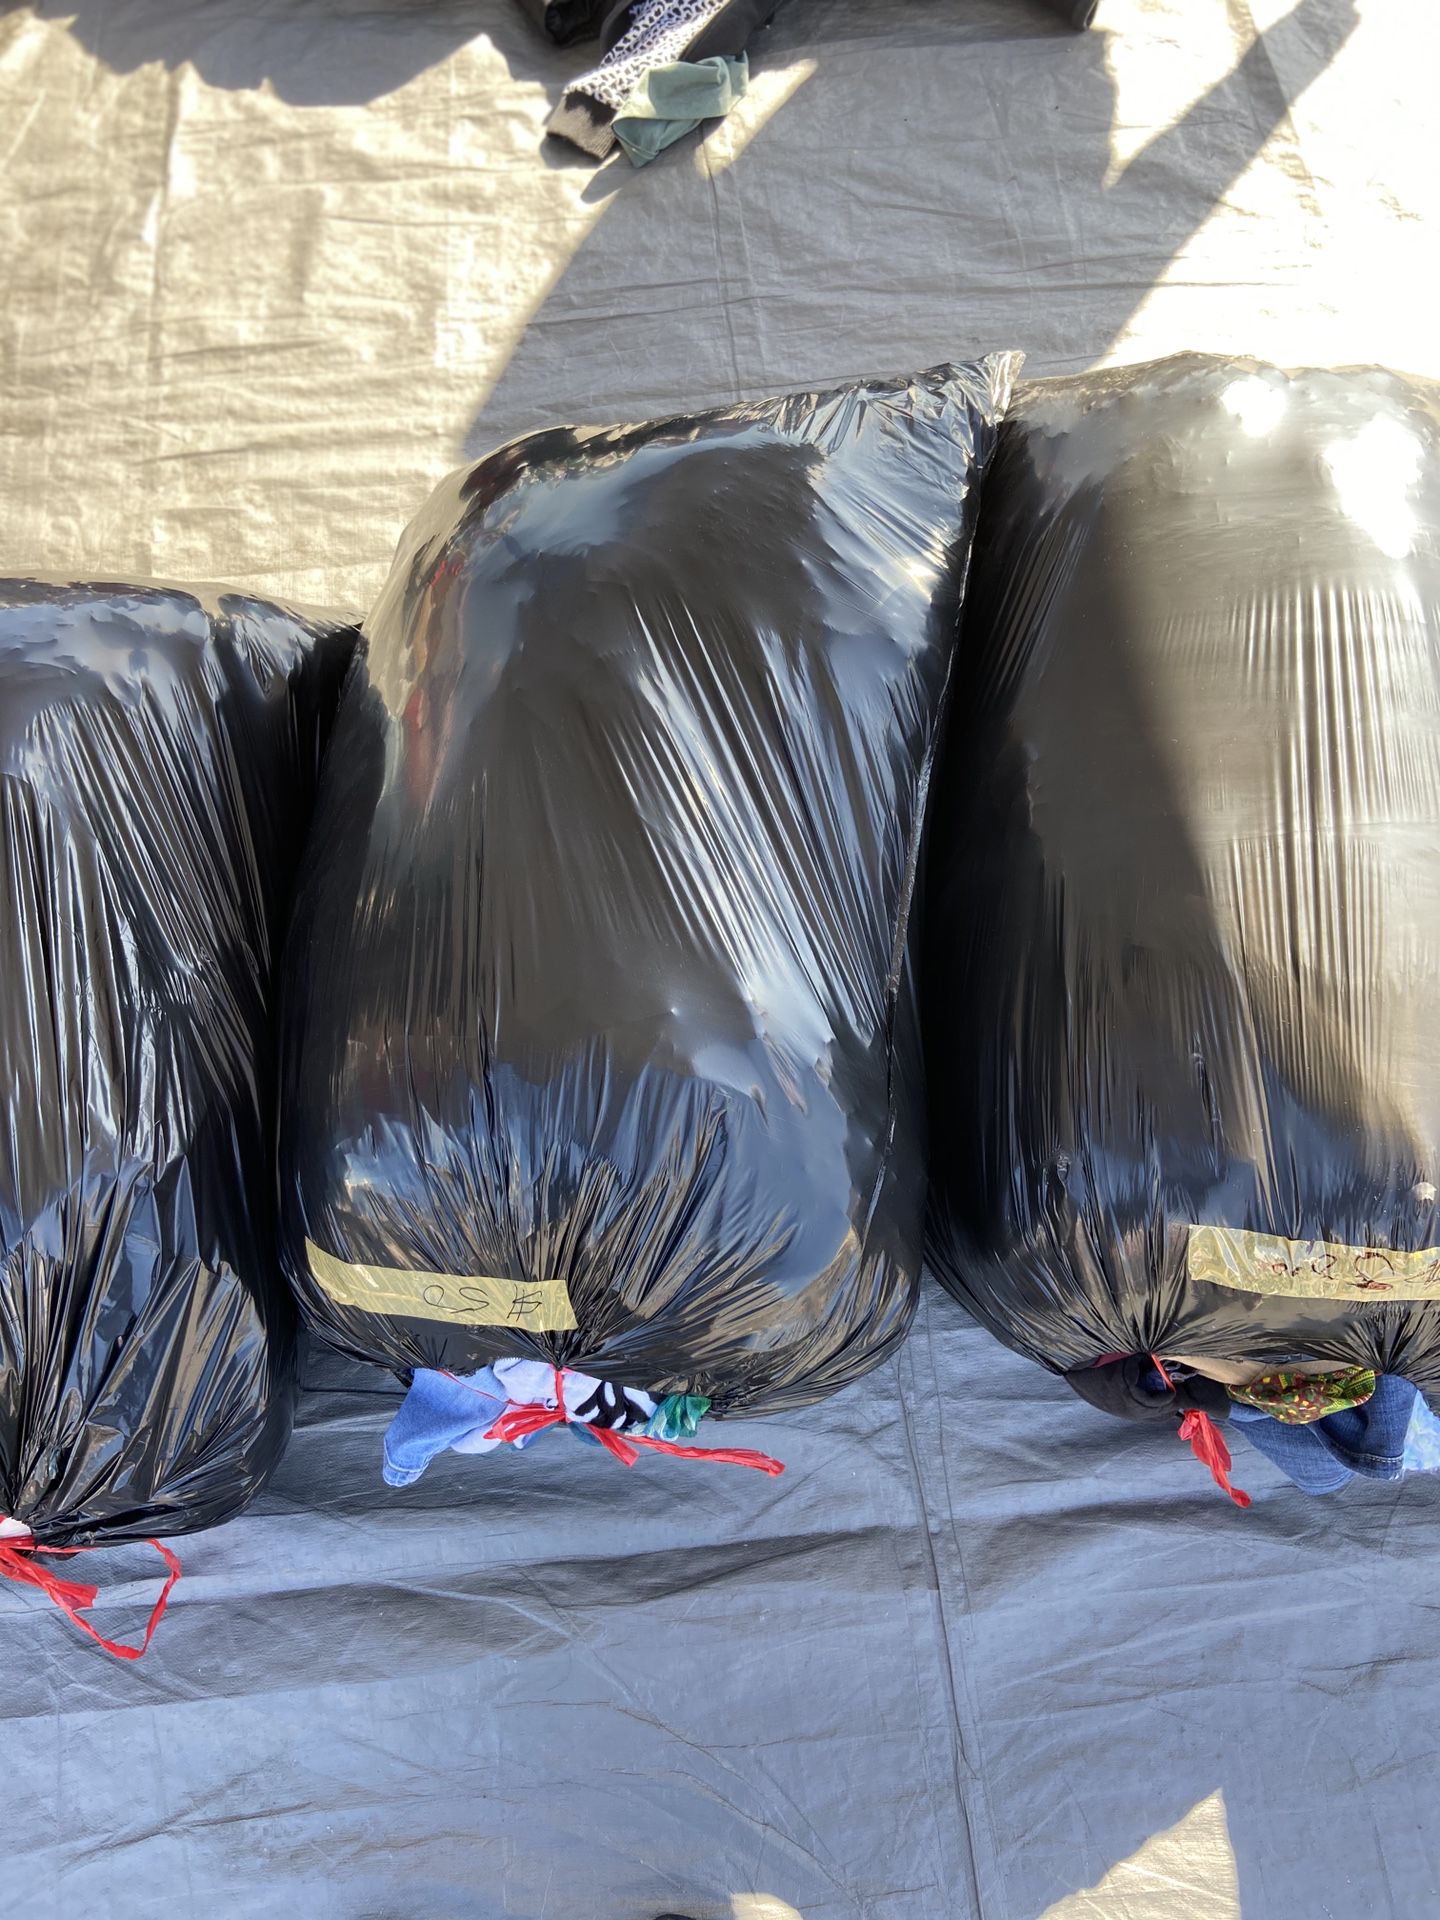 2 Large Trash Bags Of Clothes Size Large Xl for Sale in El Paso, TX -  OfferUp